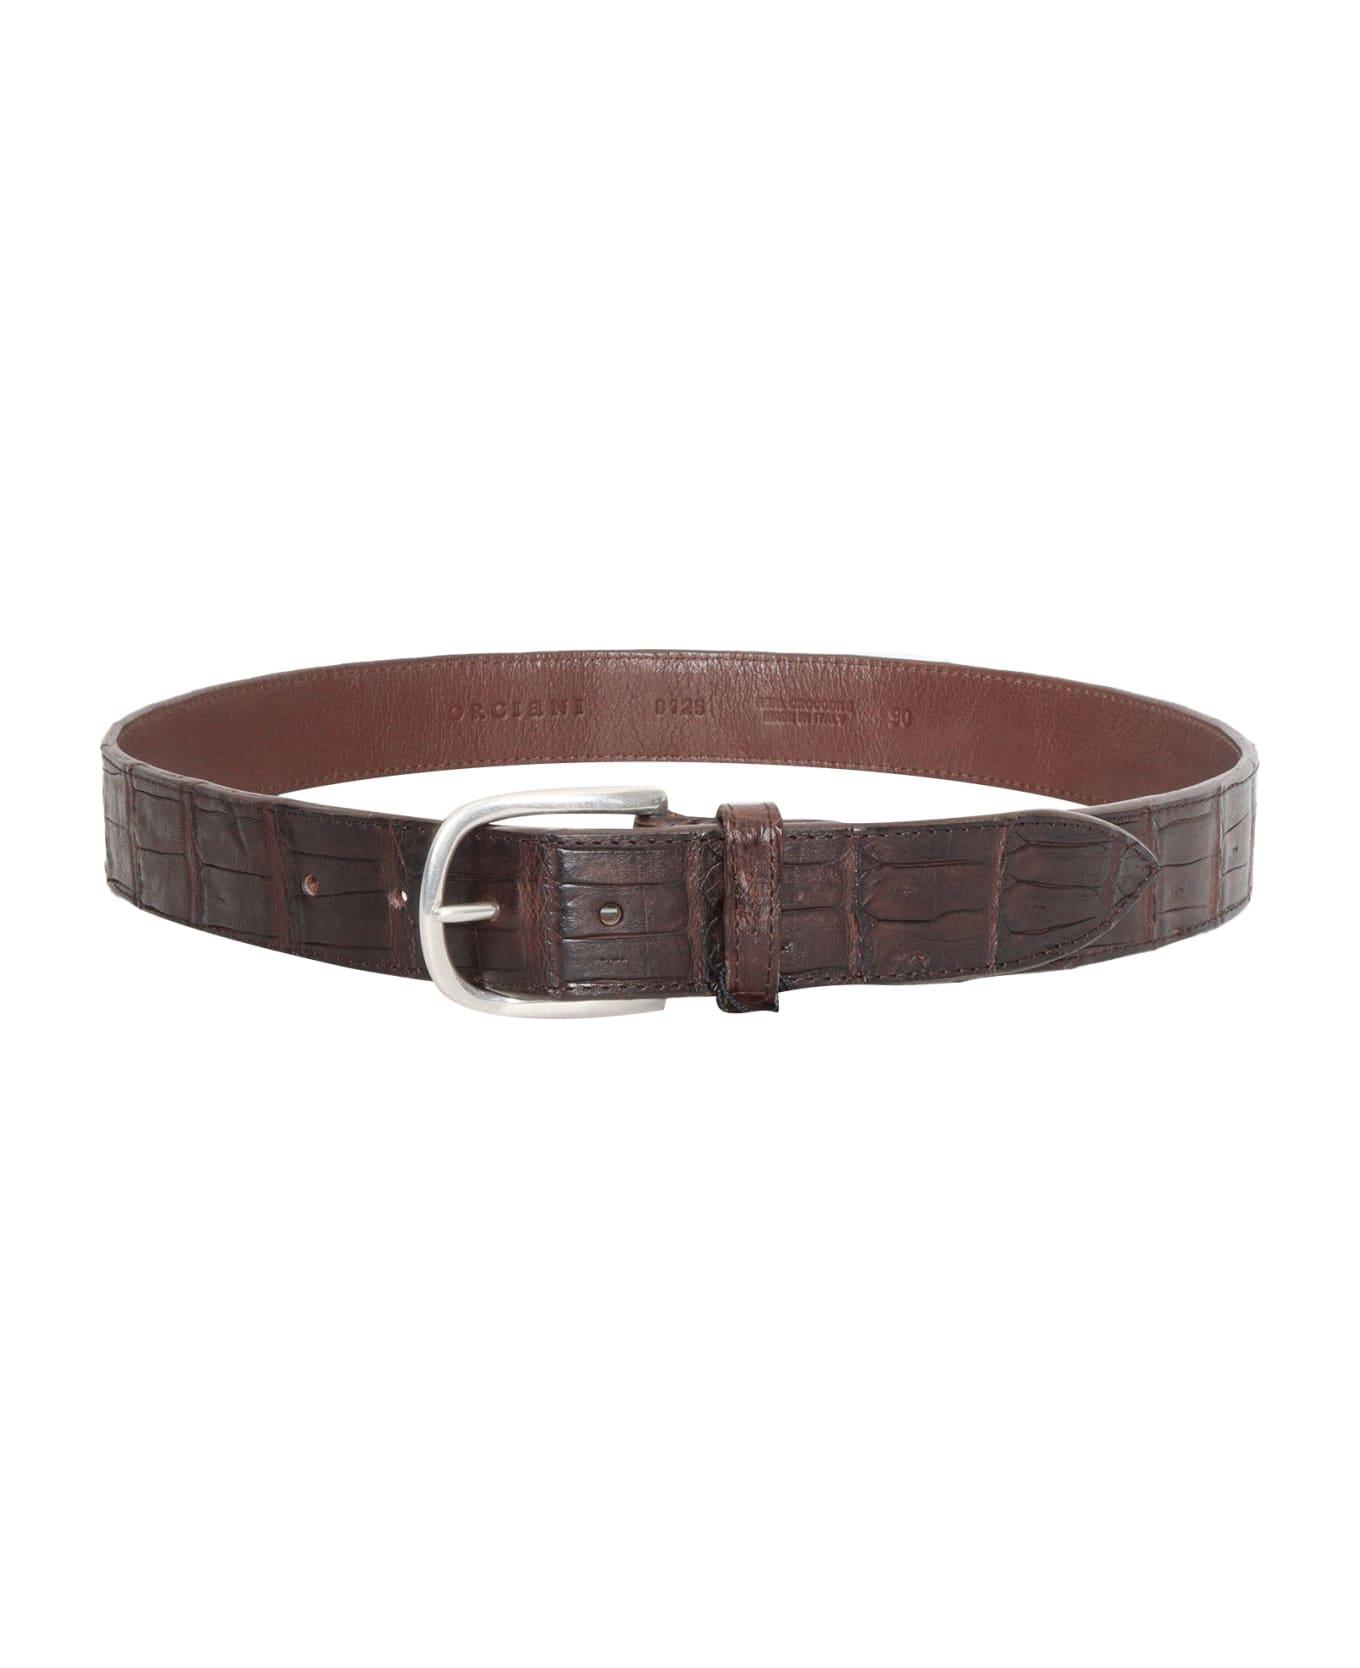 Orciani Classic Cocco Belt - BROWN